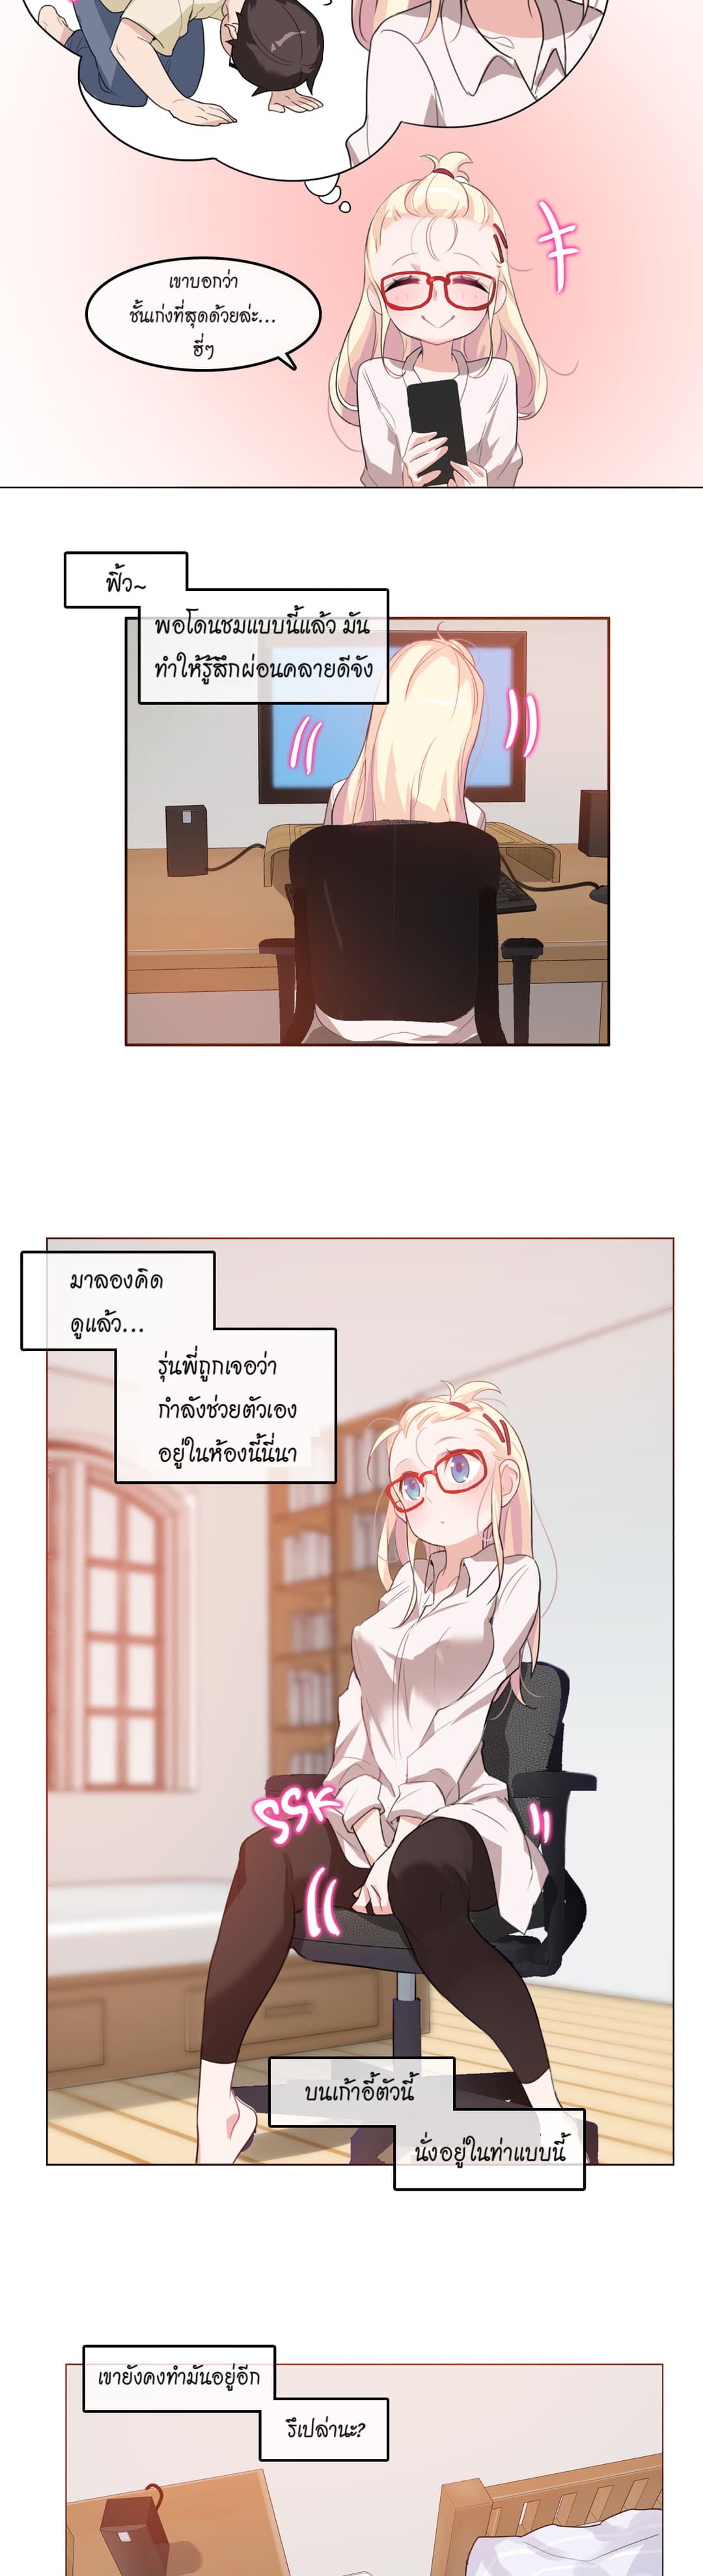 A Pervert’s Daily Life 8 (14)